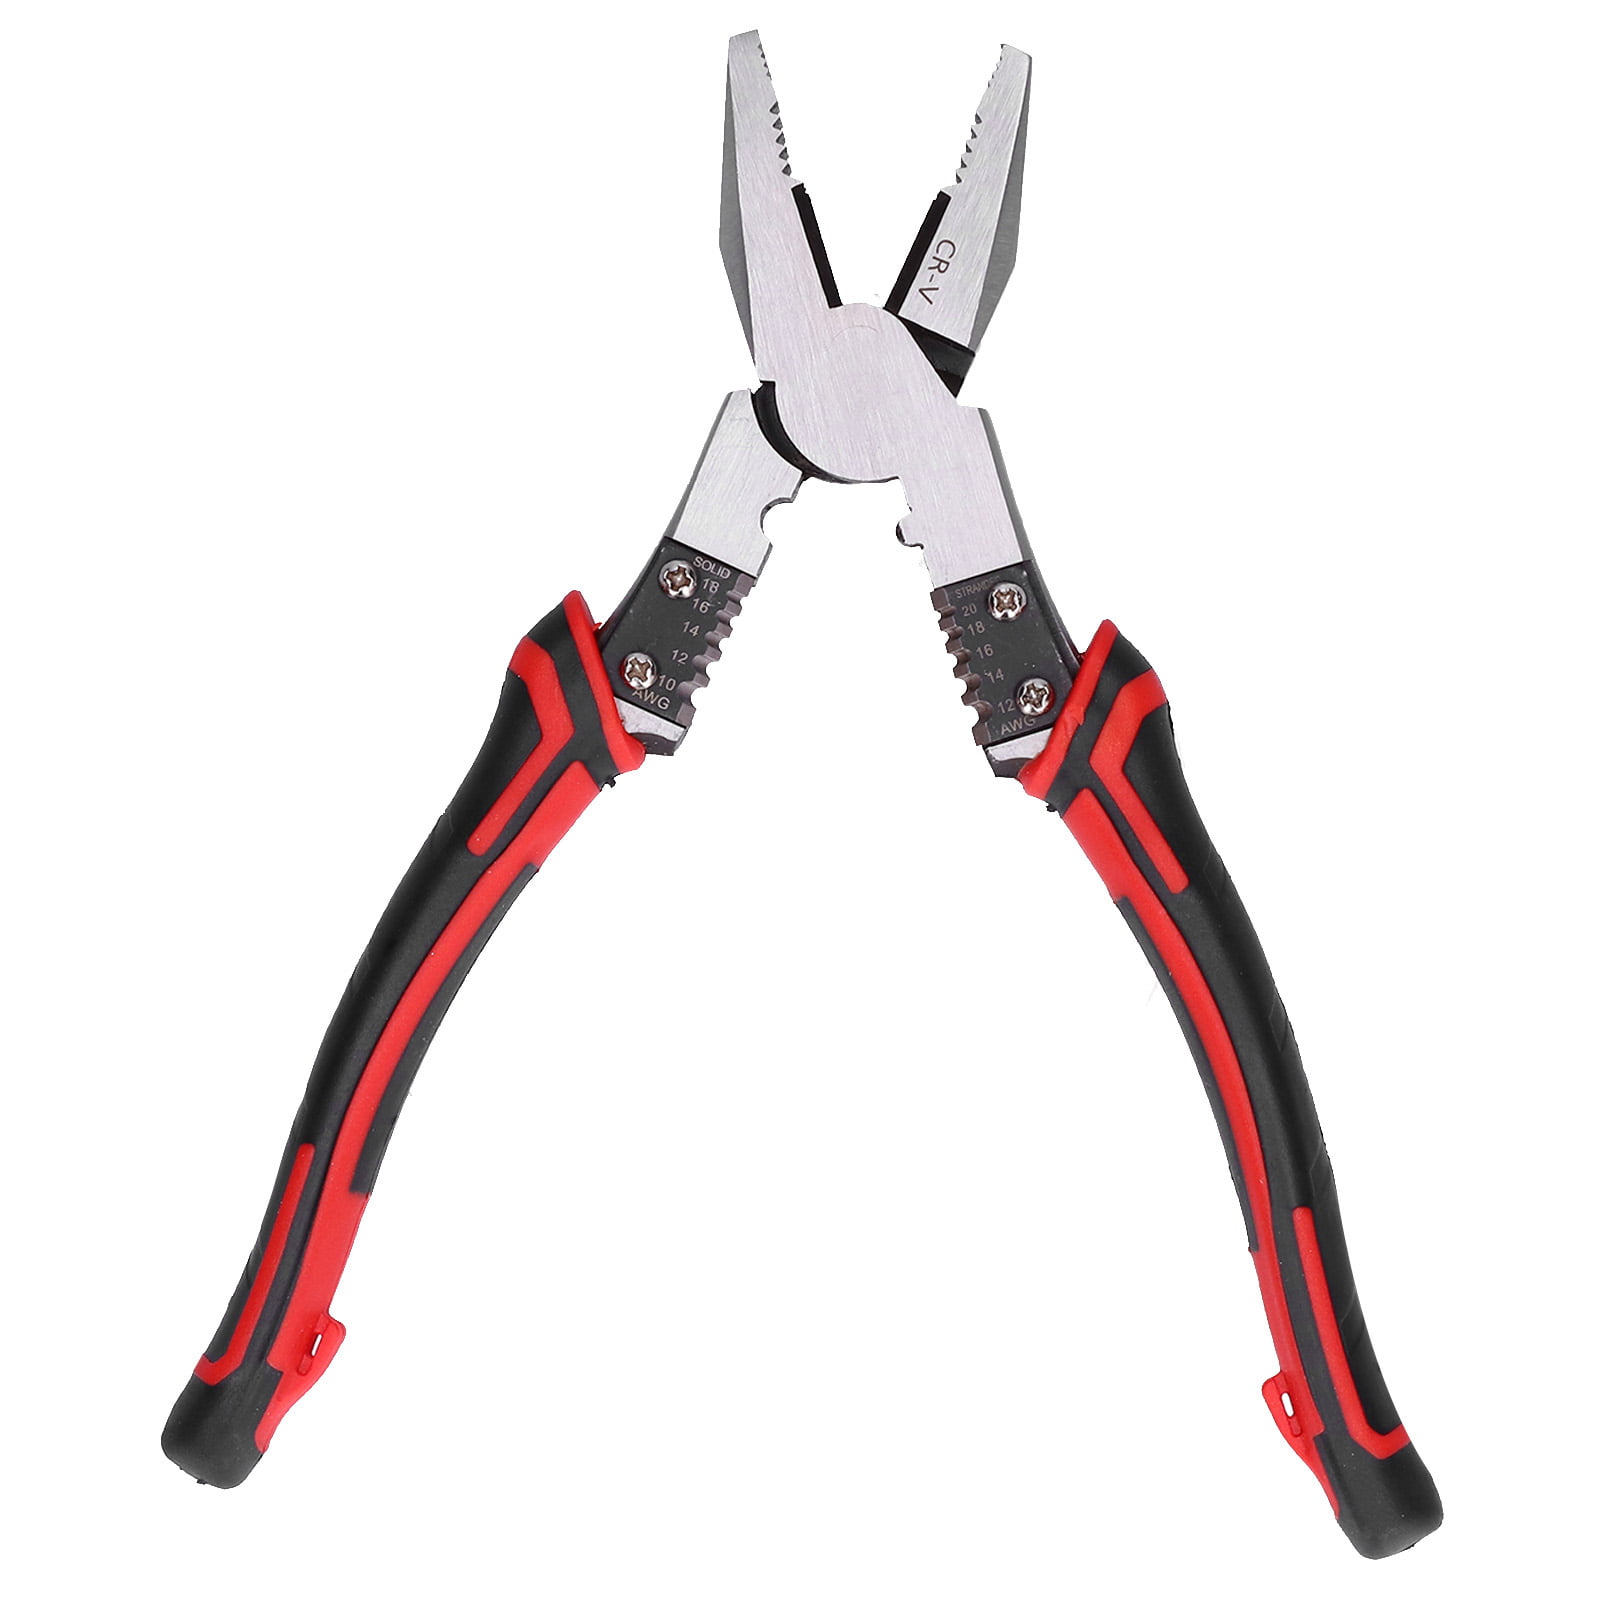 Details about   Crimping Pliers Cutting Wires Cables Terminals Crimpper Stripper Hand Tool 